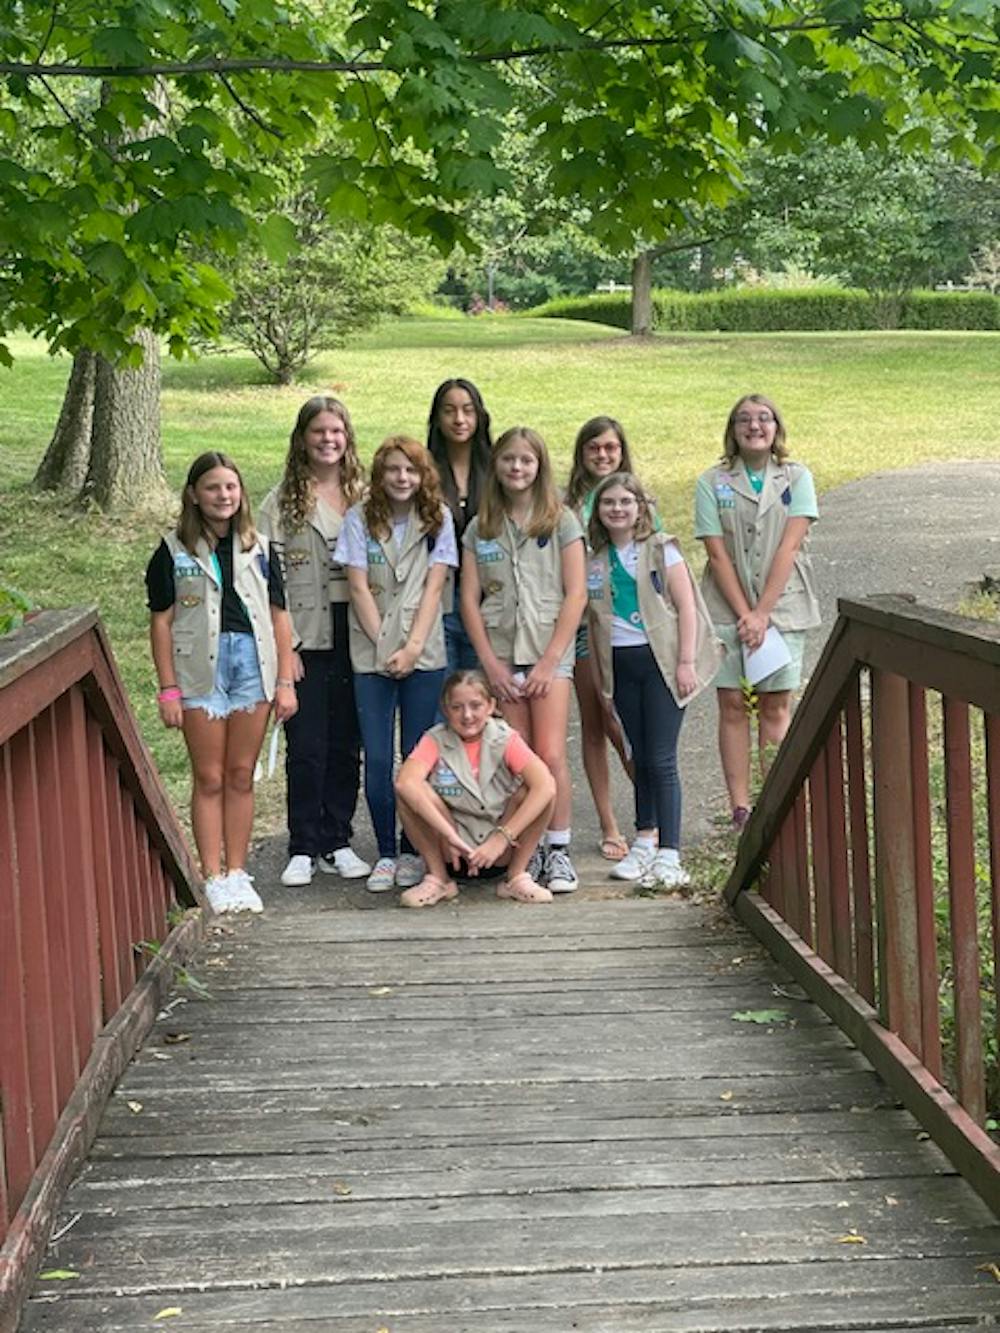 <p>Girl scout troop 42058 poses for a photo in their vests. ﻿</p>